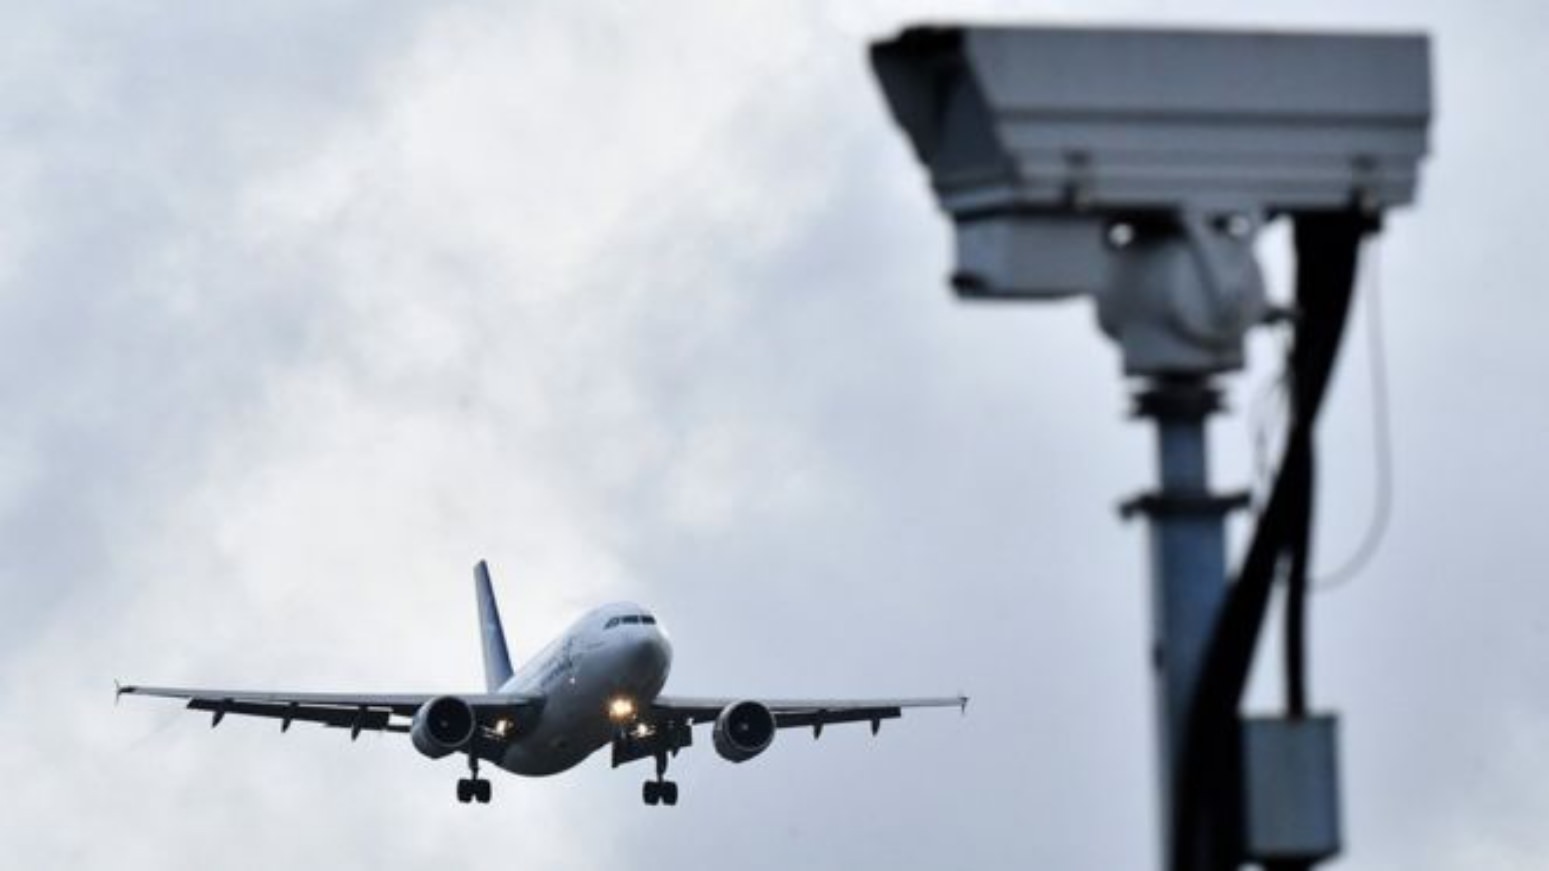 Sustained drone attack closed Gatwick, airport says